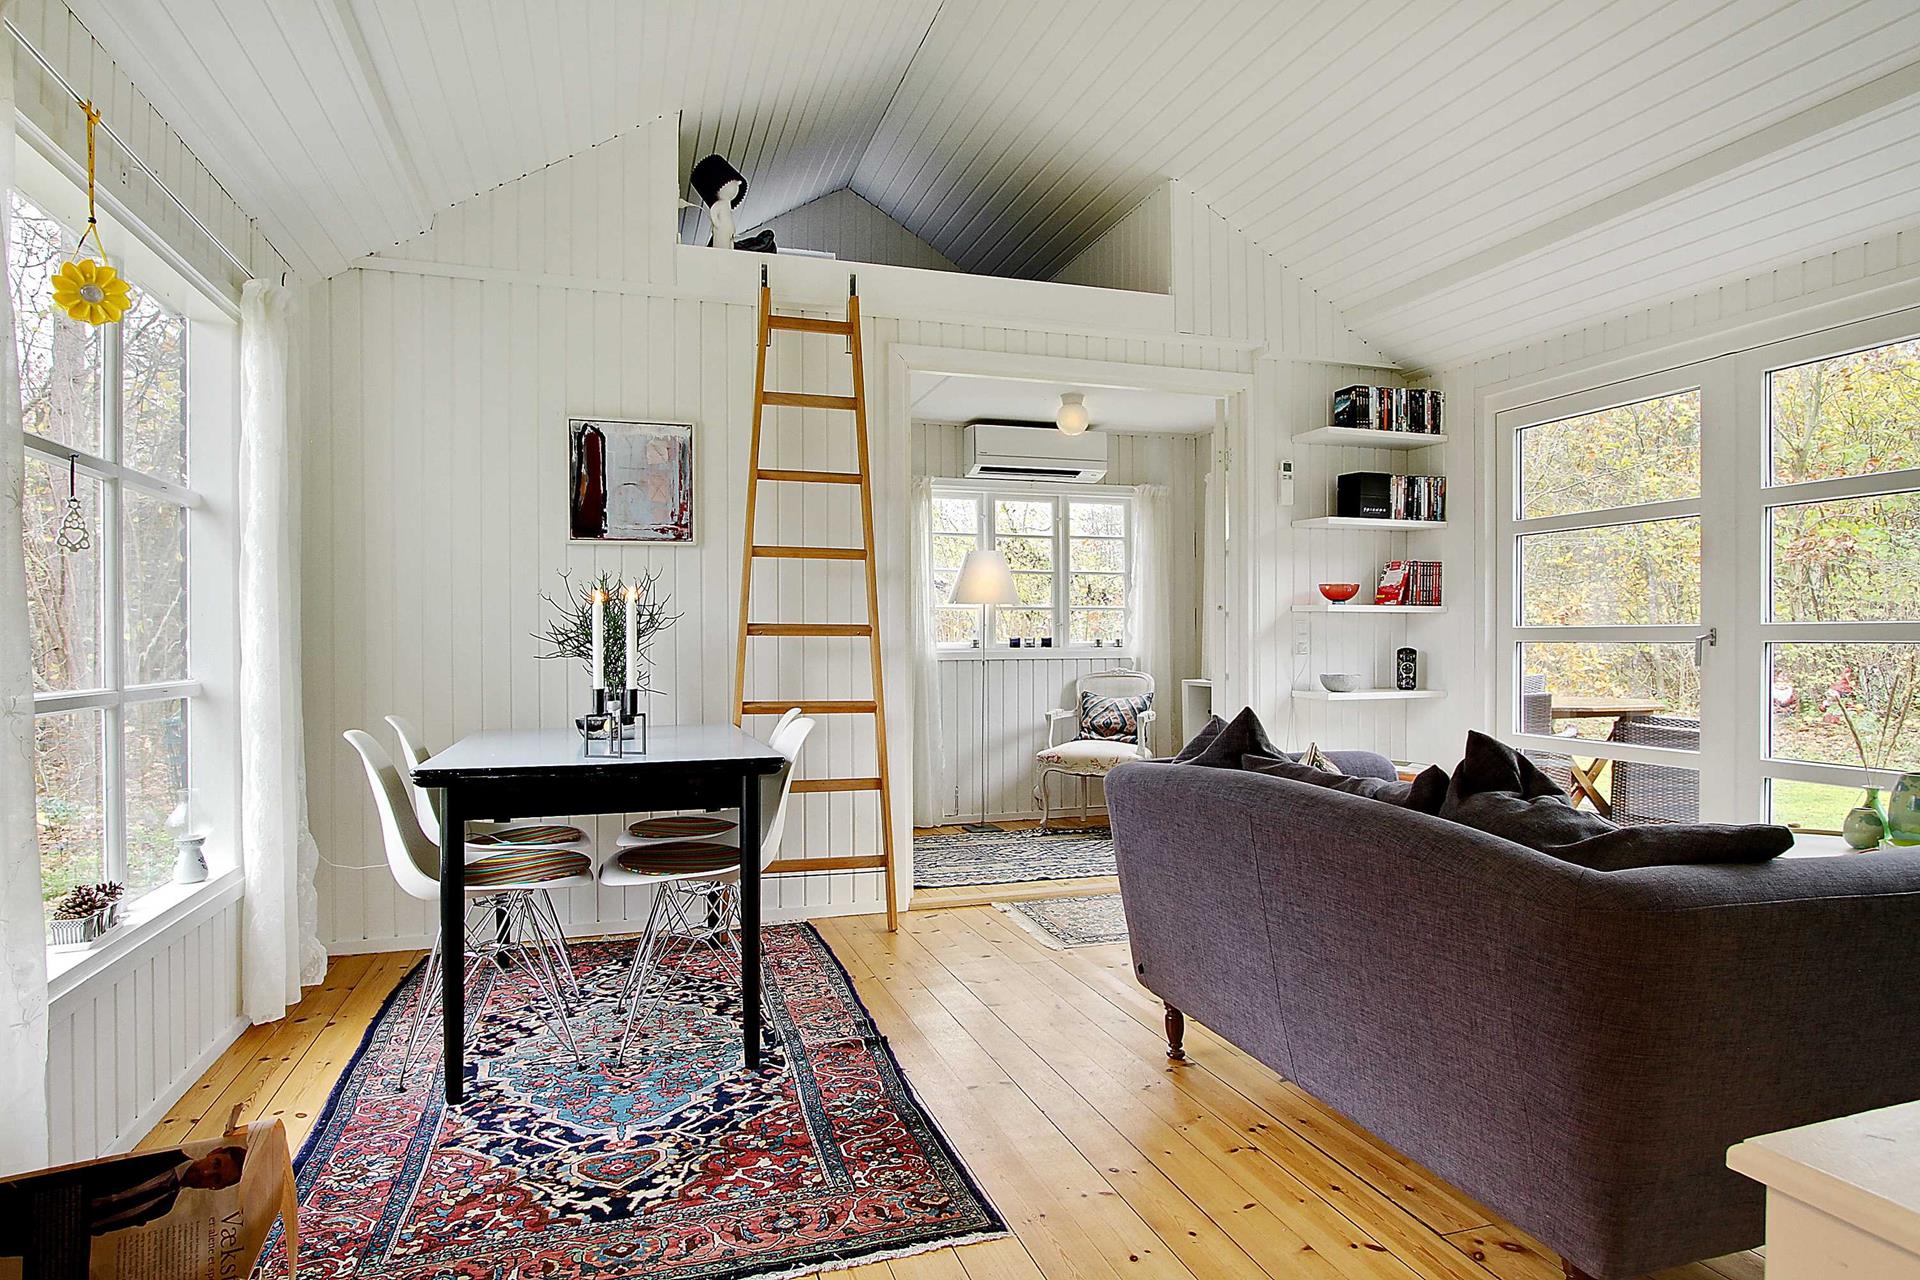 Gallery Black And White Danish Summerhouse Small House Bliss